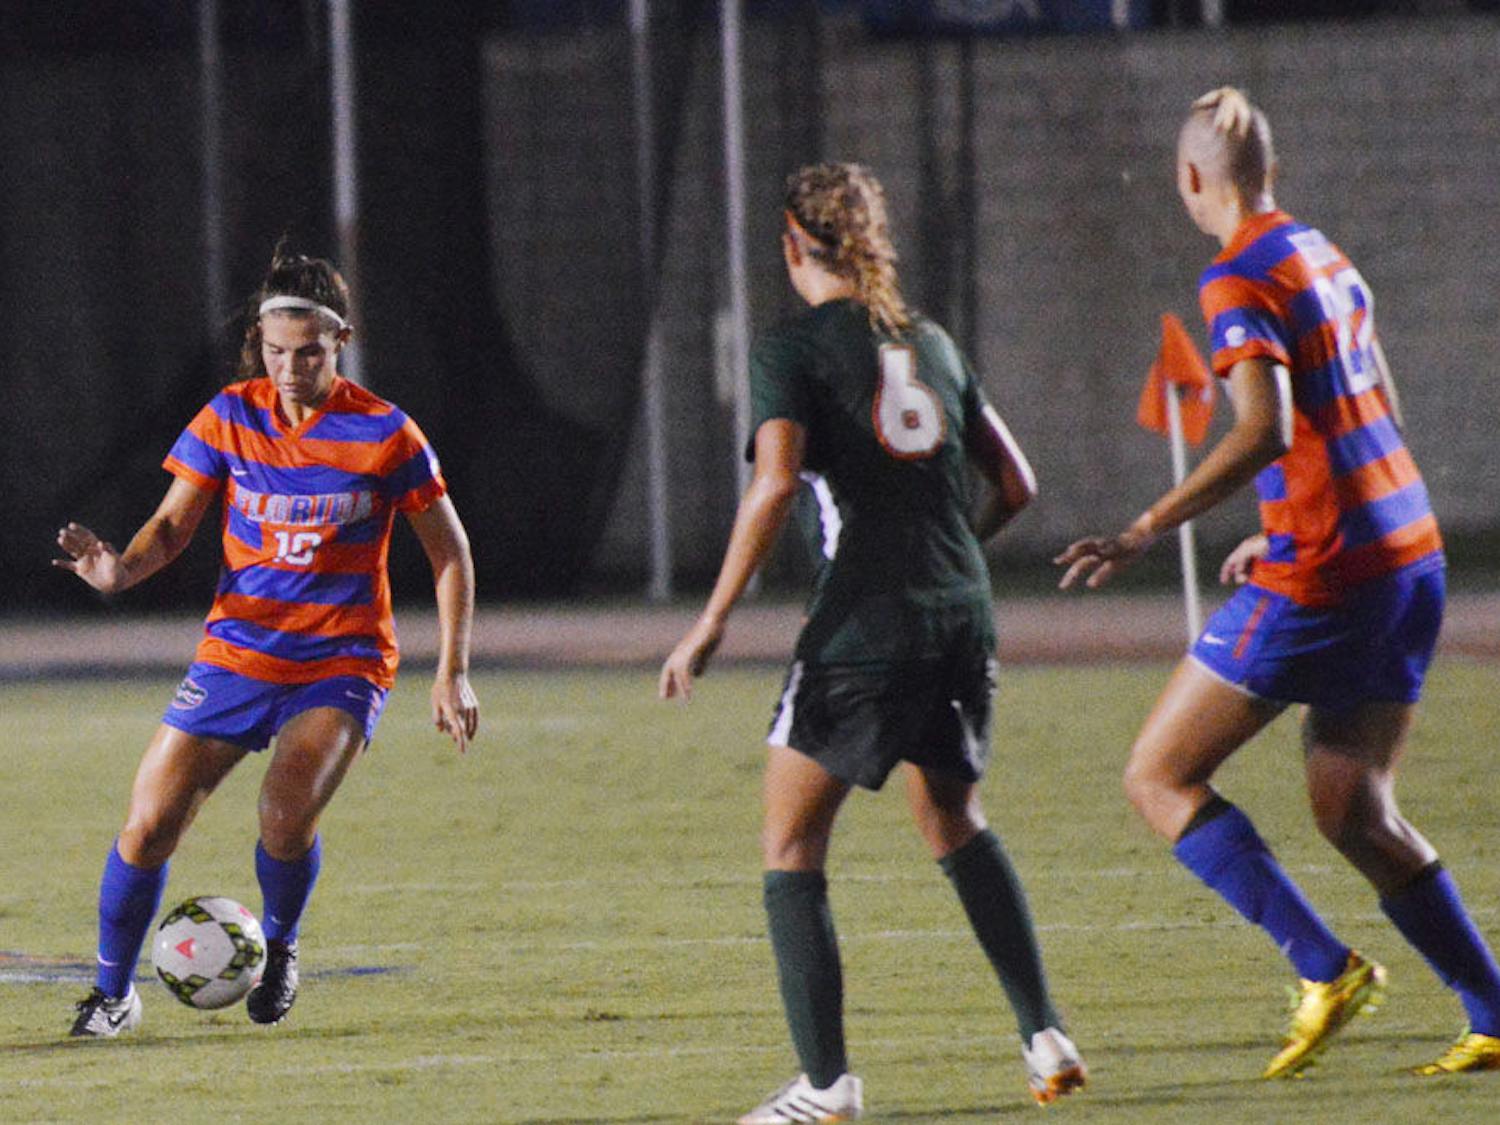 Liz Slattery dribbles the ball during Florida's 3-0 win against Miami on Aug. 22 at James G. Pressly Stadium.